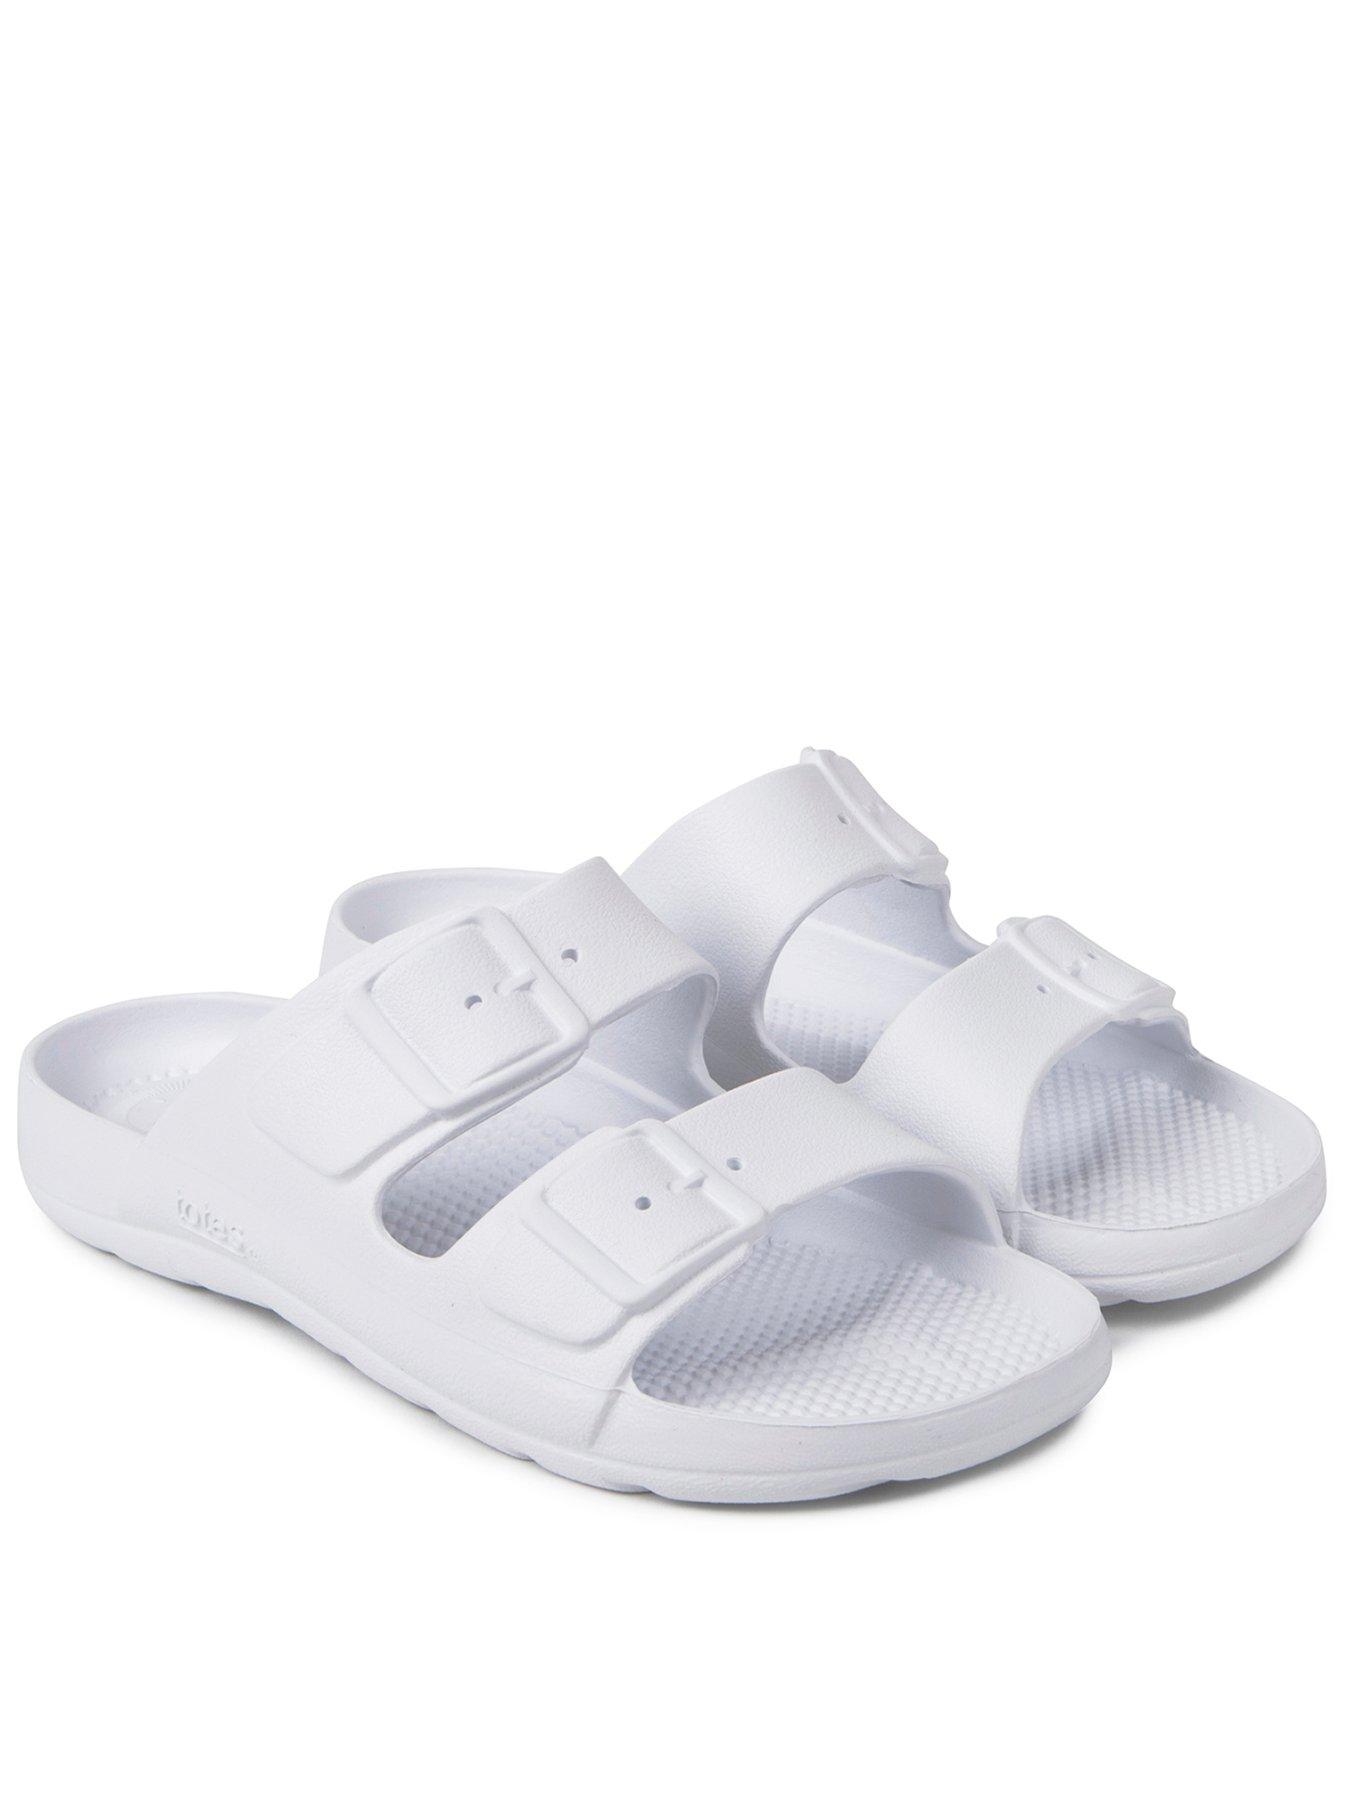 Totes Sol Bounce 2-Strap Slides - White, 6 - Foods Co.